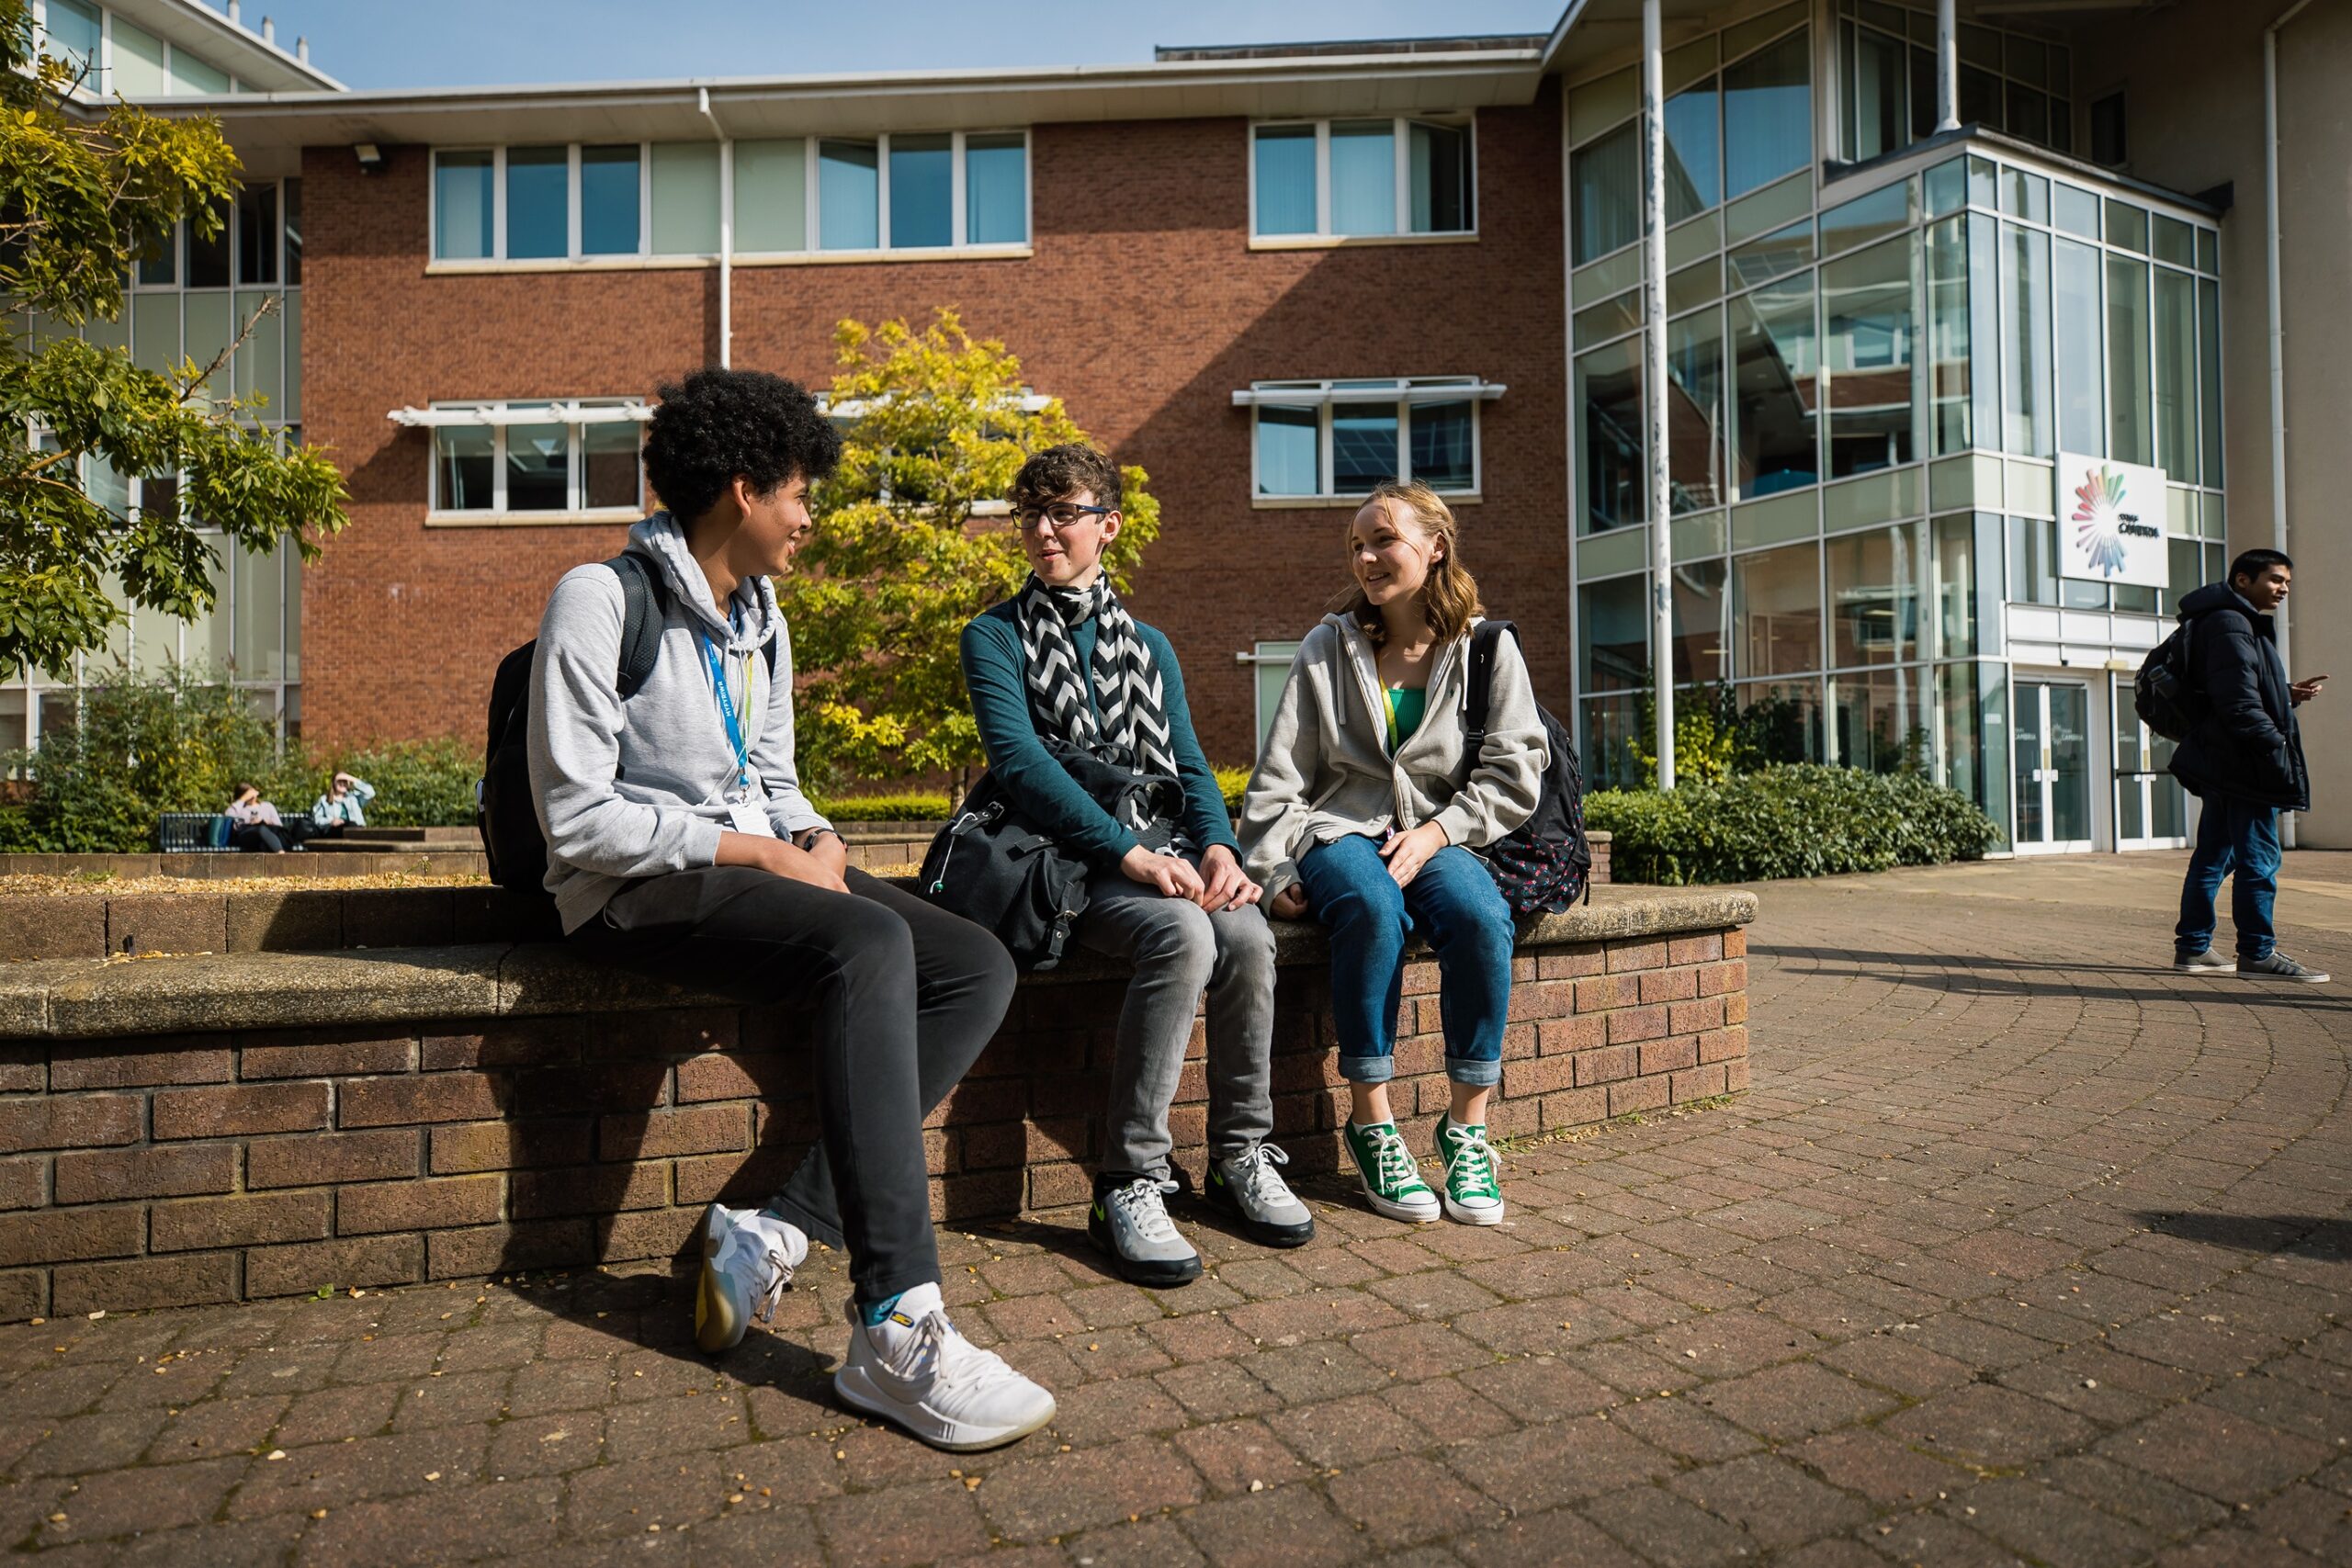 Three Yale Sixth Form students sat down on a wall outside the Sixth Form building